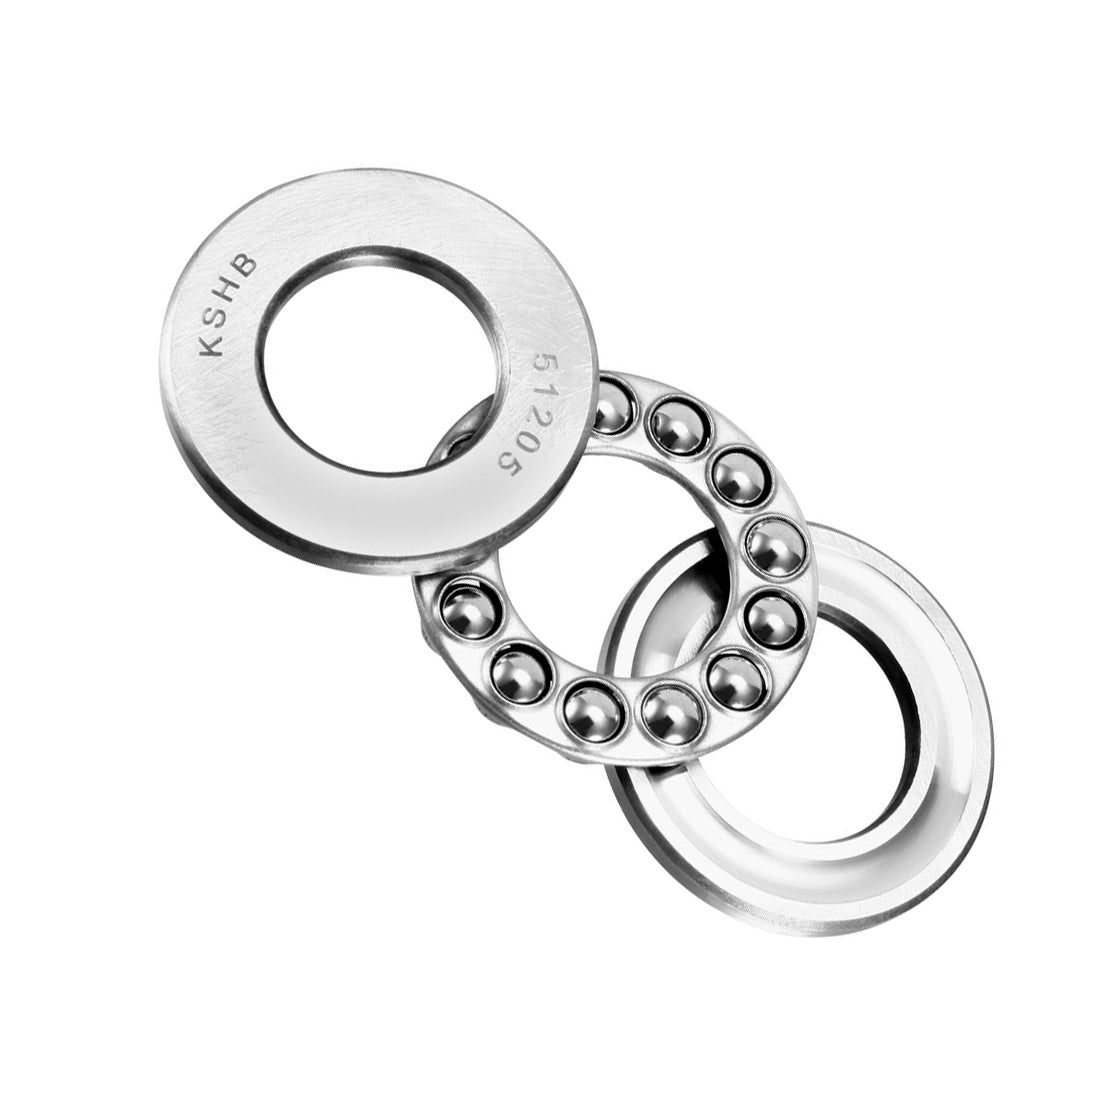 uxcell Uxcell 51205 Single Direction Thrust Ball Bearings 25mm x 47mm x 15mm Chrome Steel